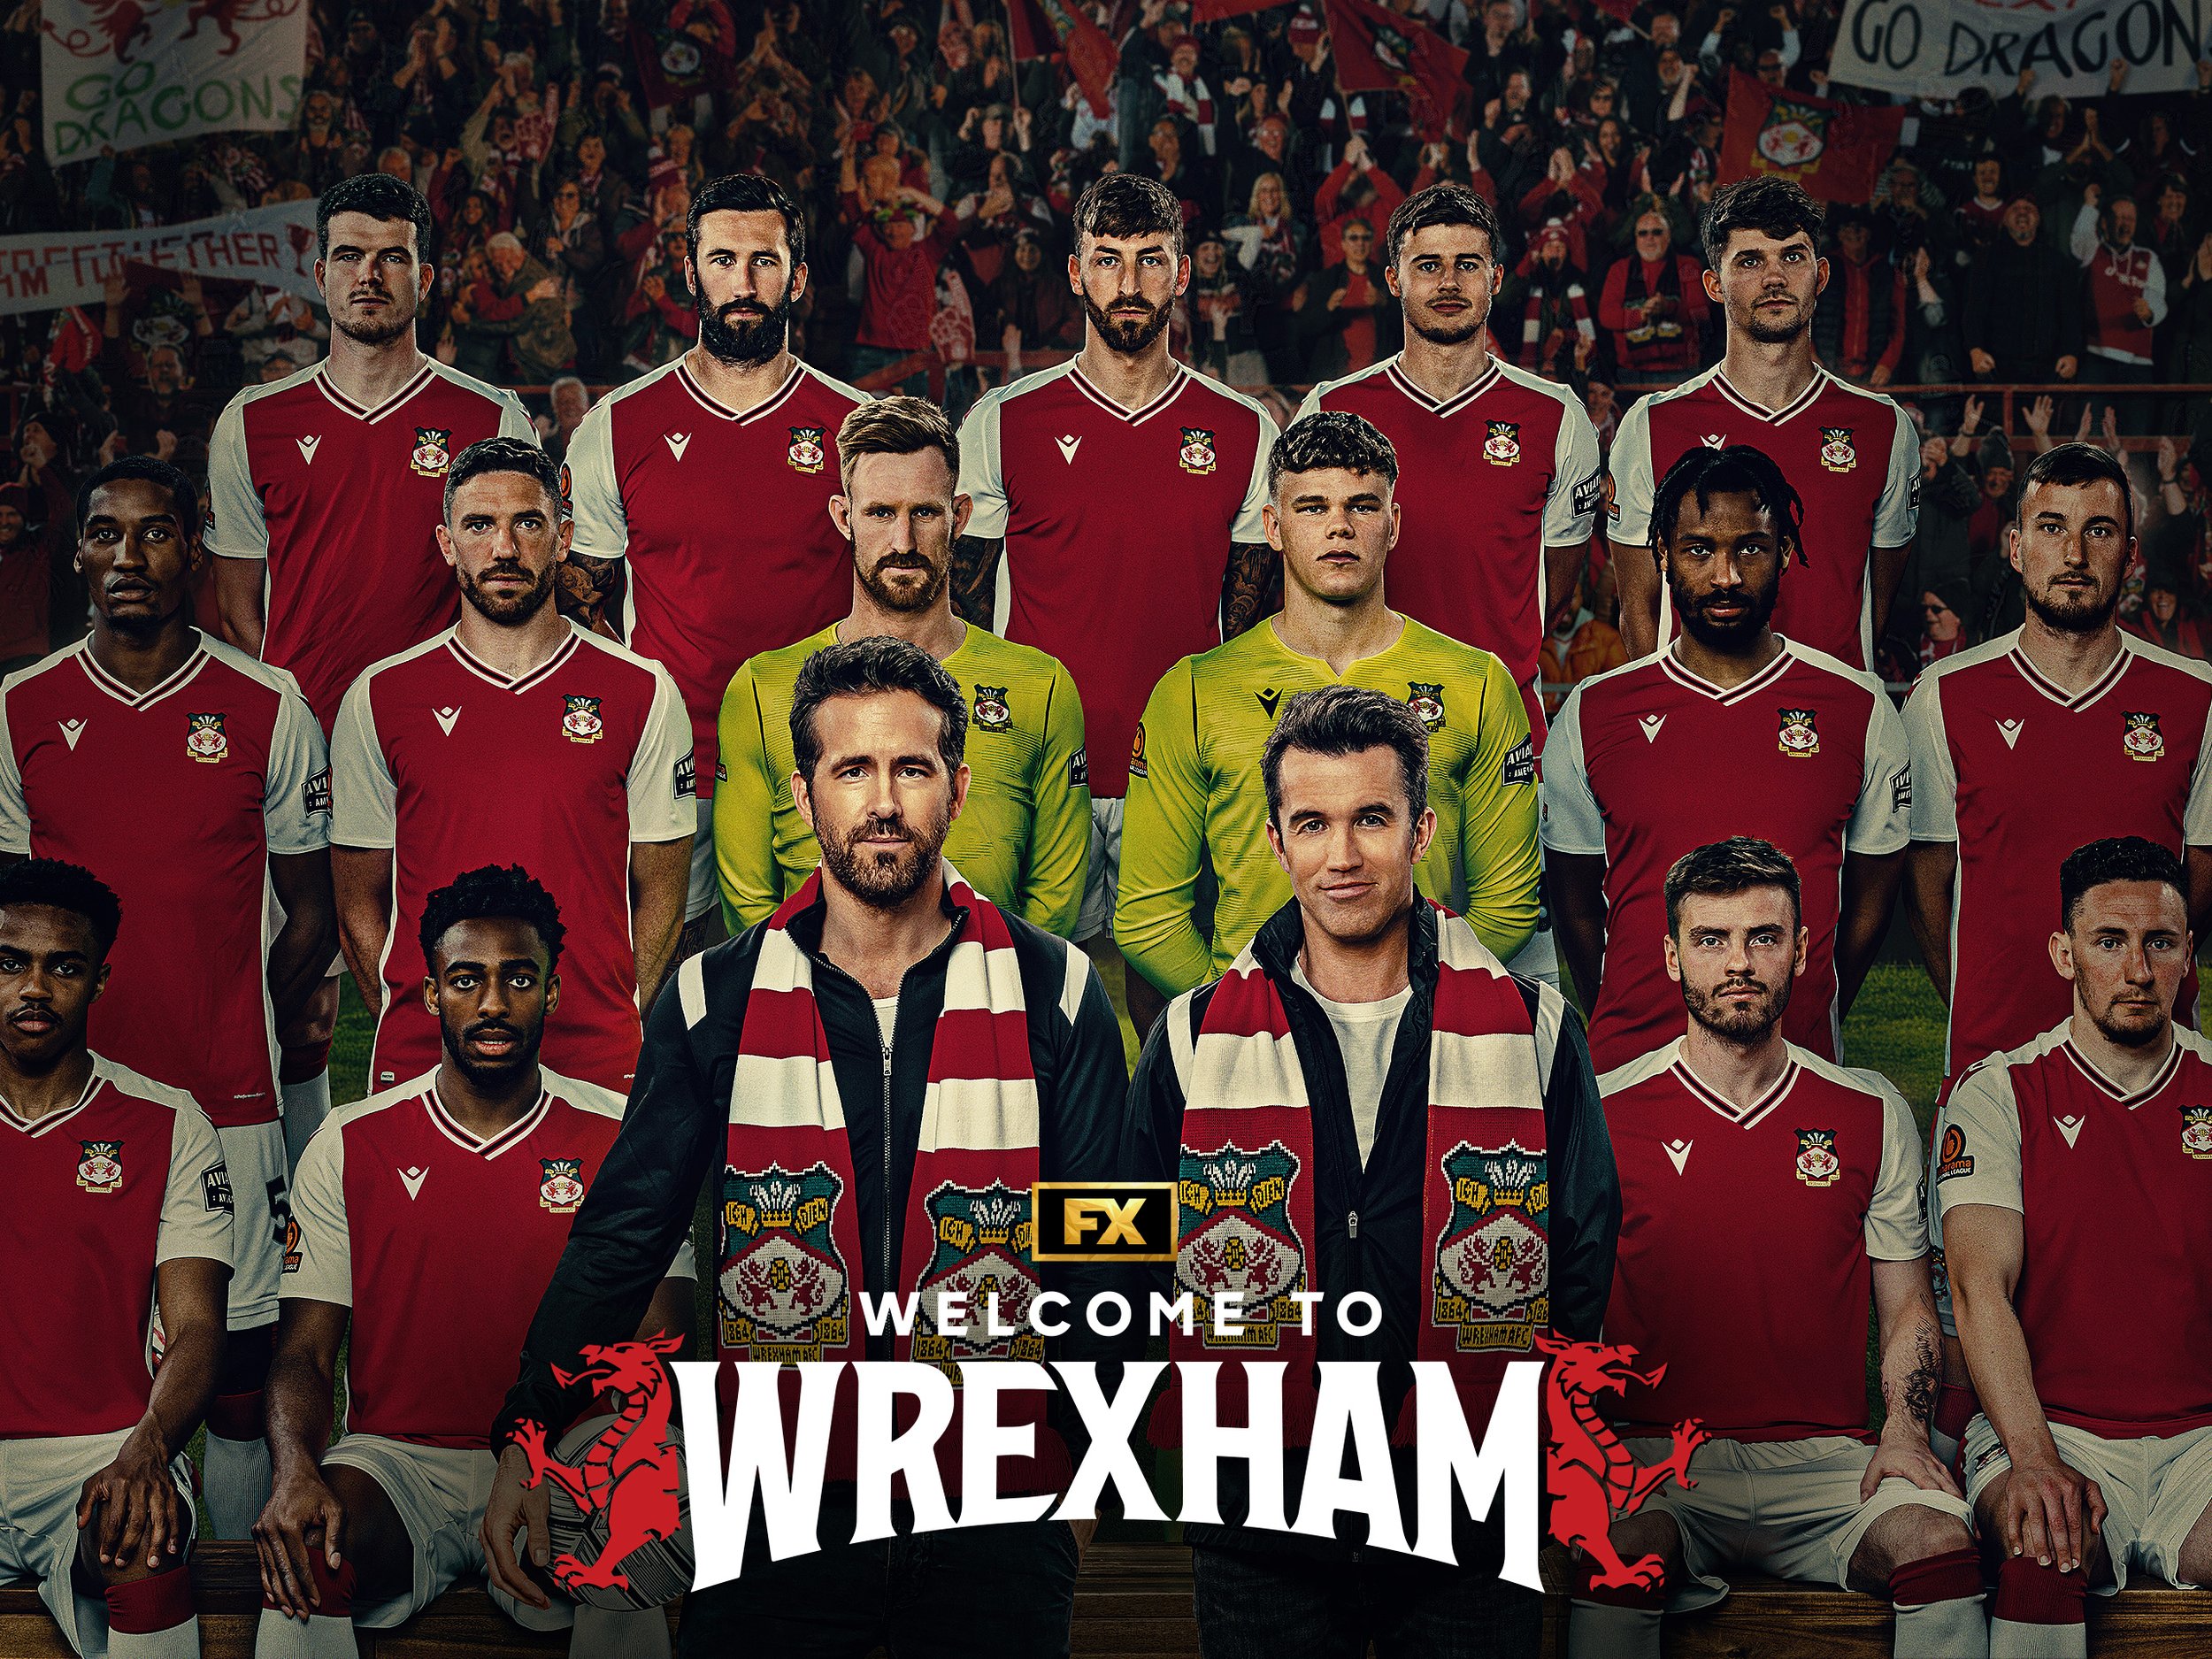 Welcome to Wrexham: Series 1